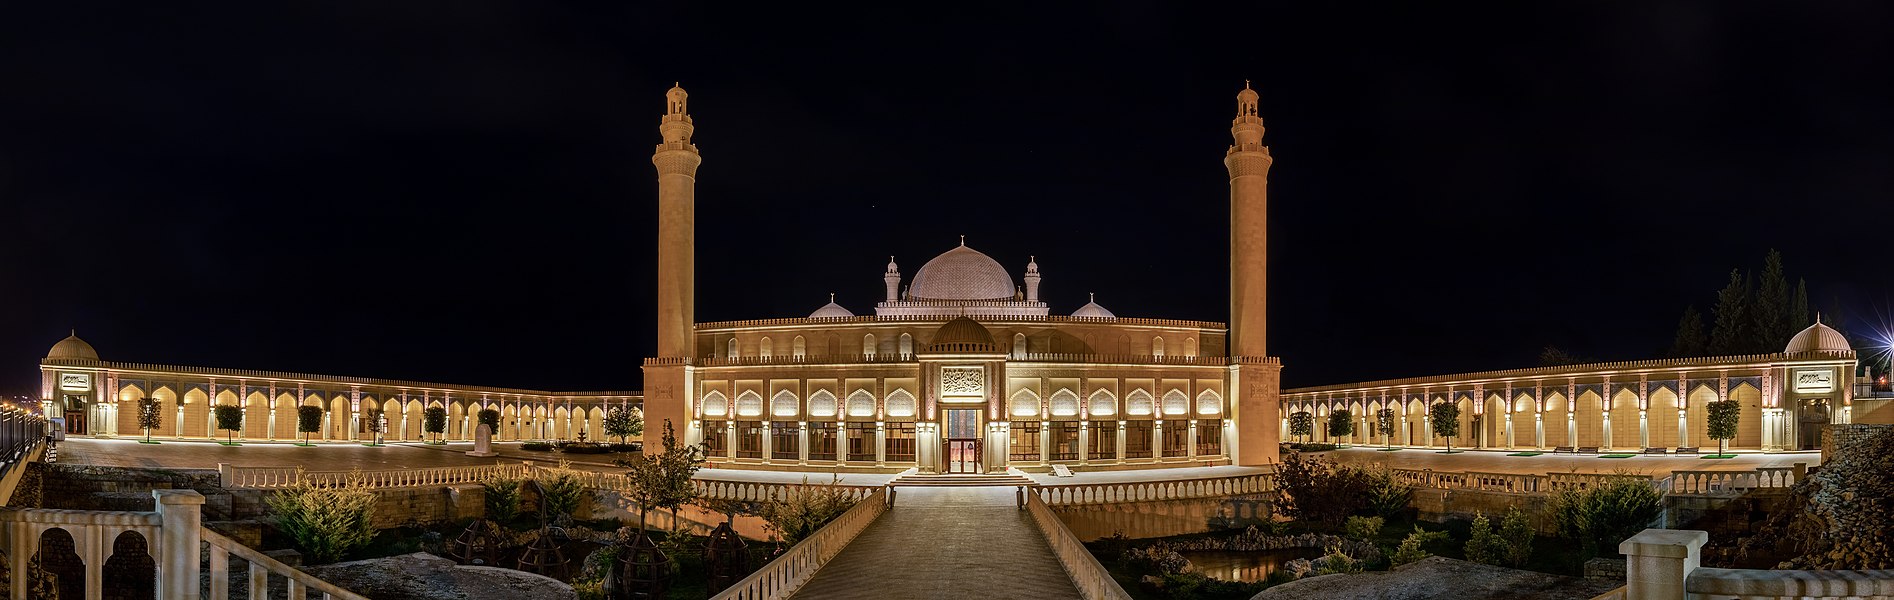 Azerbaijan: Panoramic night view of the Juma (Friday) Mosque, Shamakhi. This mosque was built in 743. The mosque has suffered damage from plundering, wars, and earthquakes. It was reconstructed in 2009.